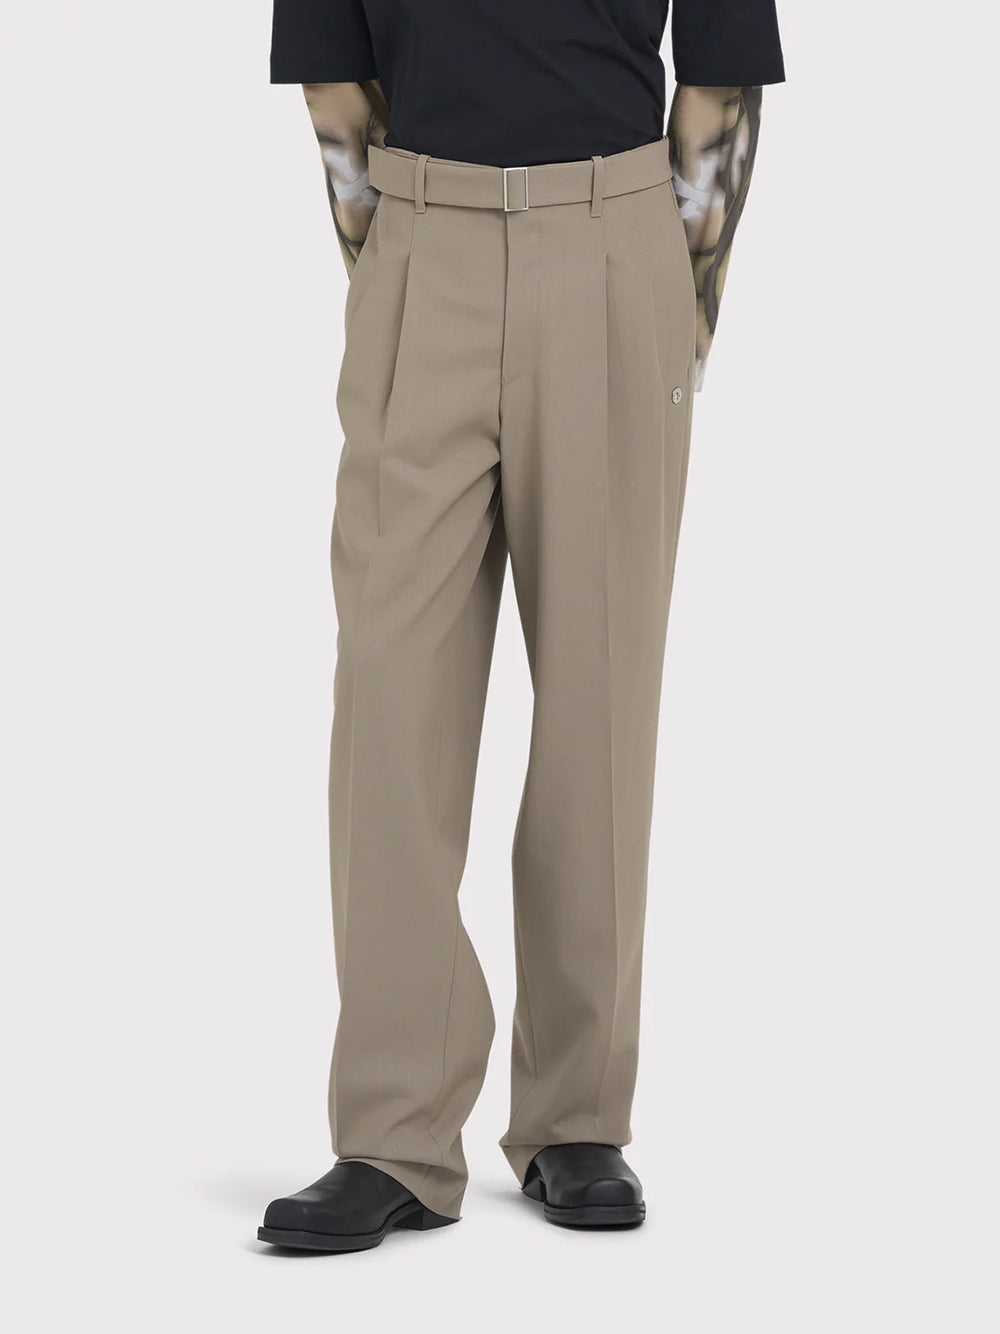 Cooper suiting sand trousers